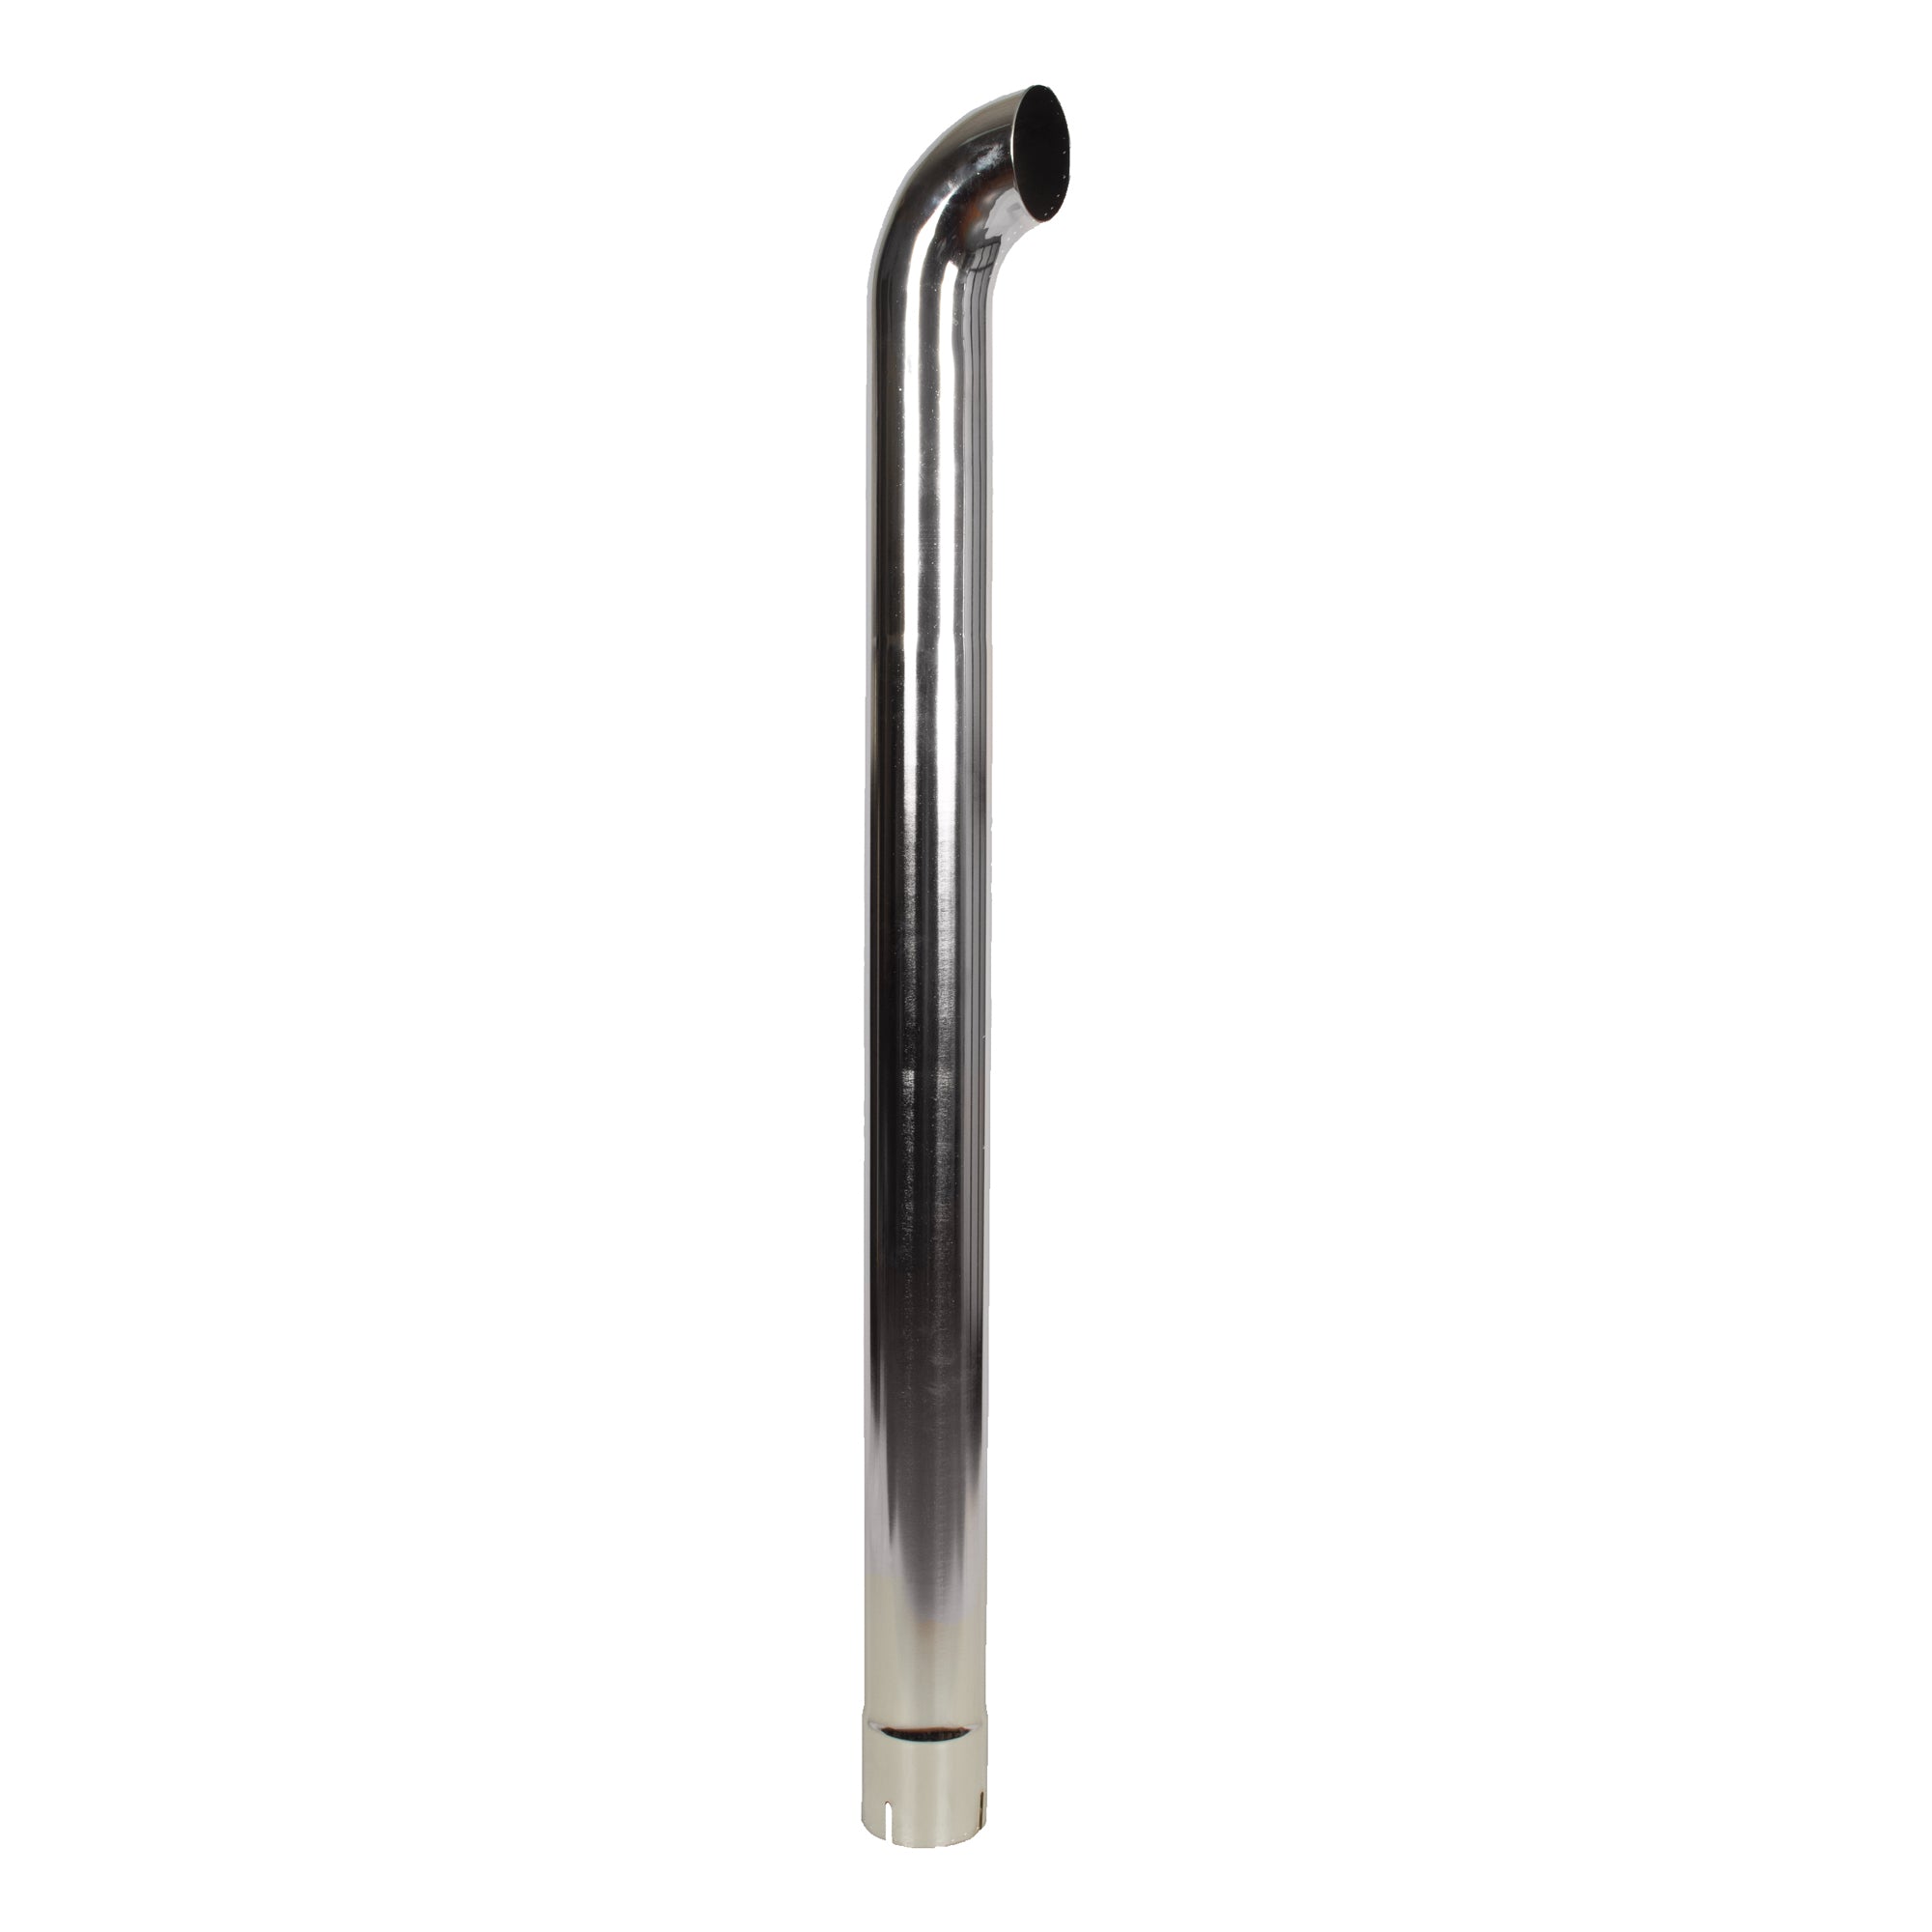 Exhaust Stack Pipe   3-1/2" x 48" Curved Chrome